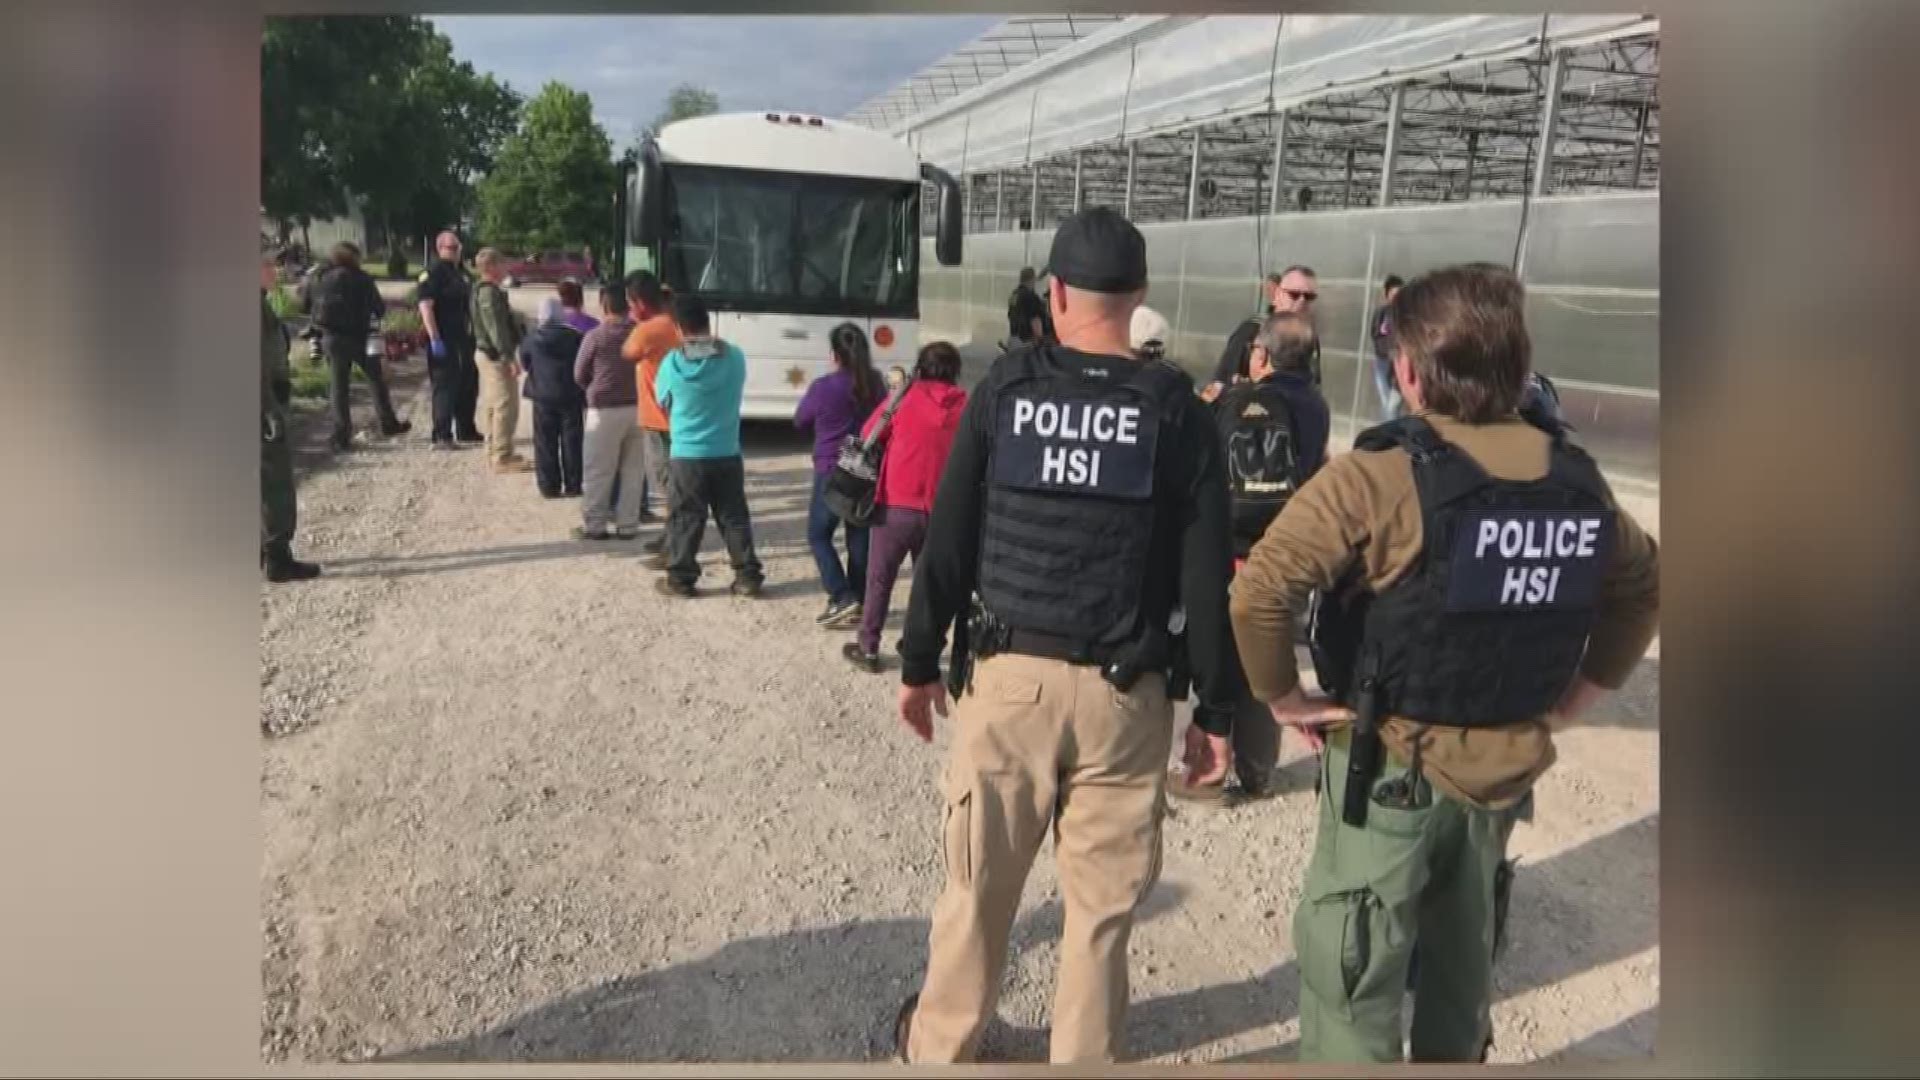 ACLU sends message to Congress to act after ICE raids in Erie County